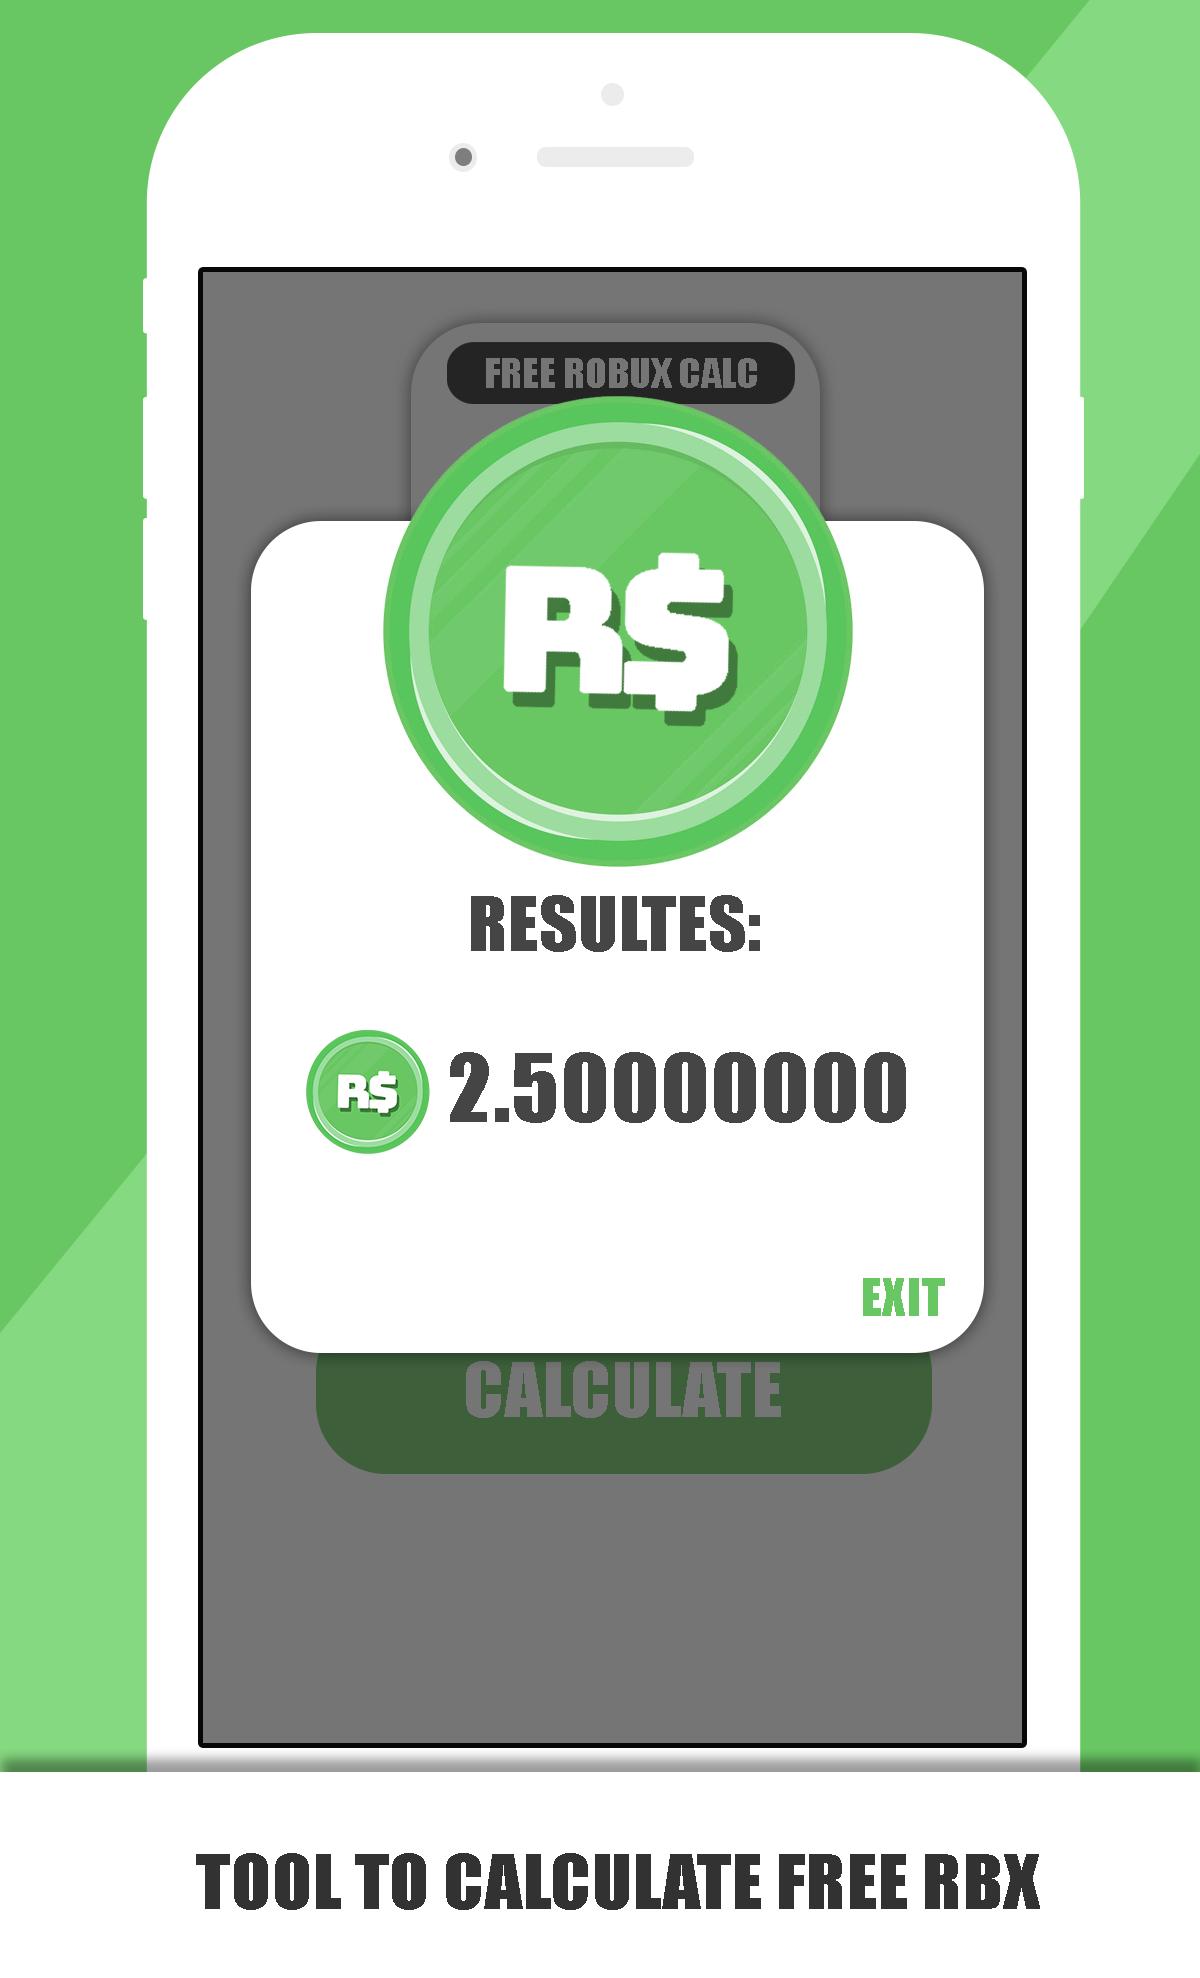 Free Robux Calculator For Rblox Rbx Magnet For Android - 2 dollars robux